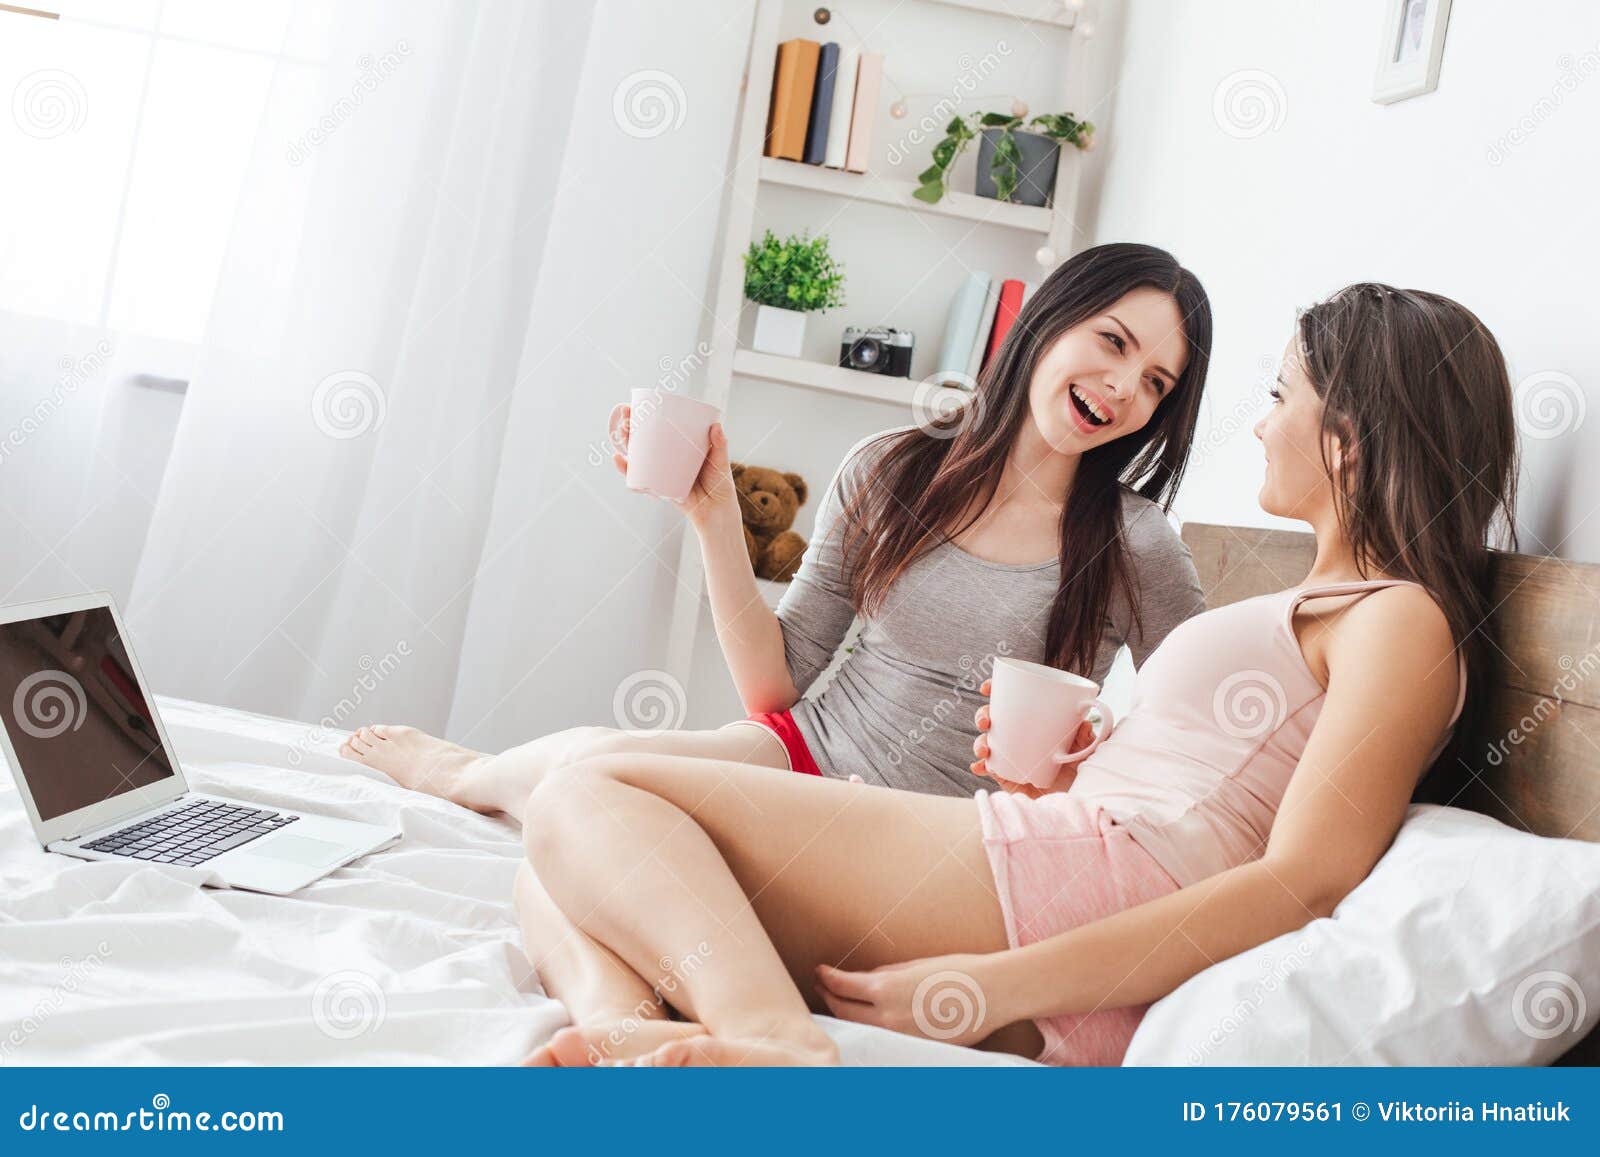 Lesbian Couple In Bedroom At Home Sitting Holding Cups